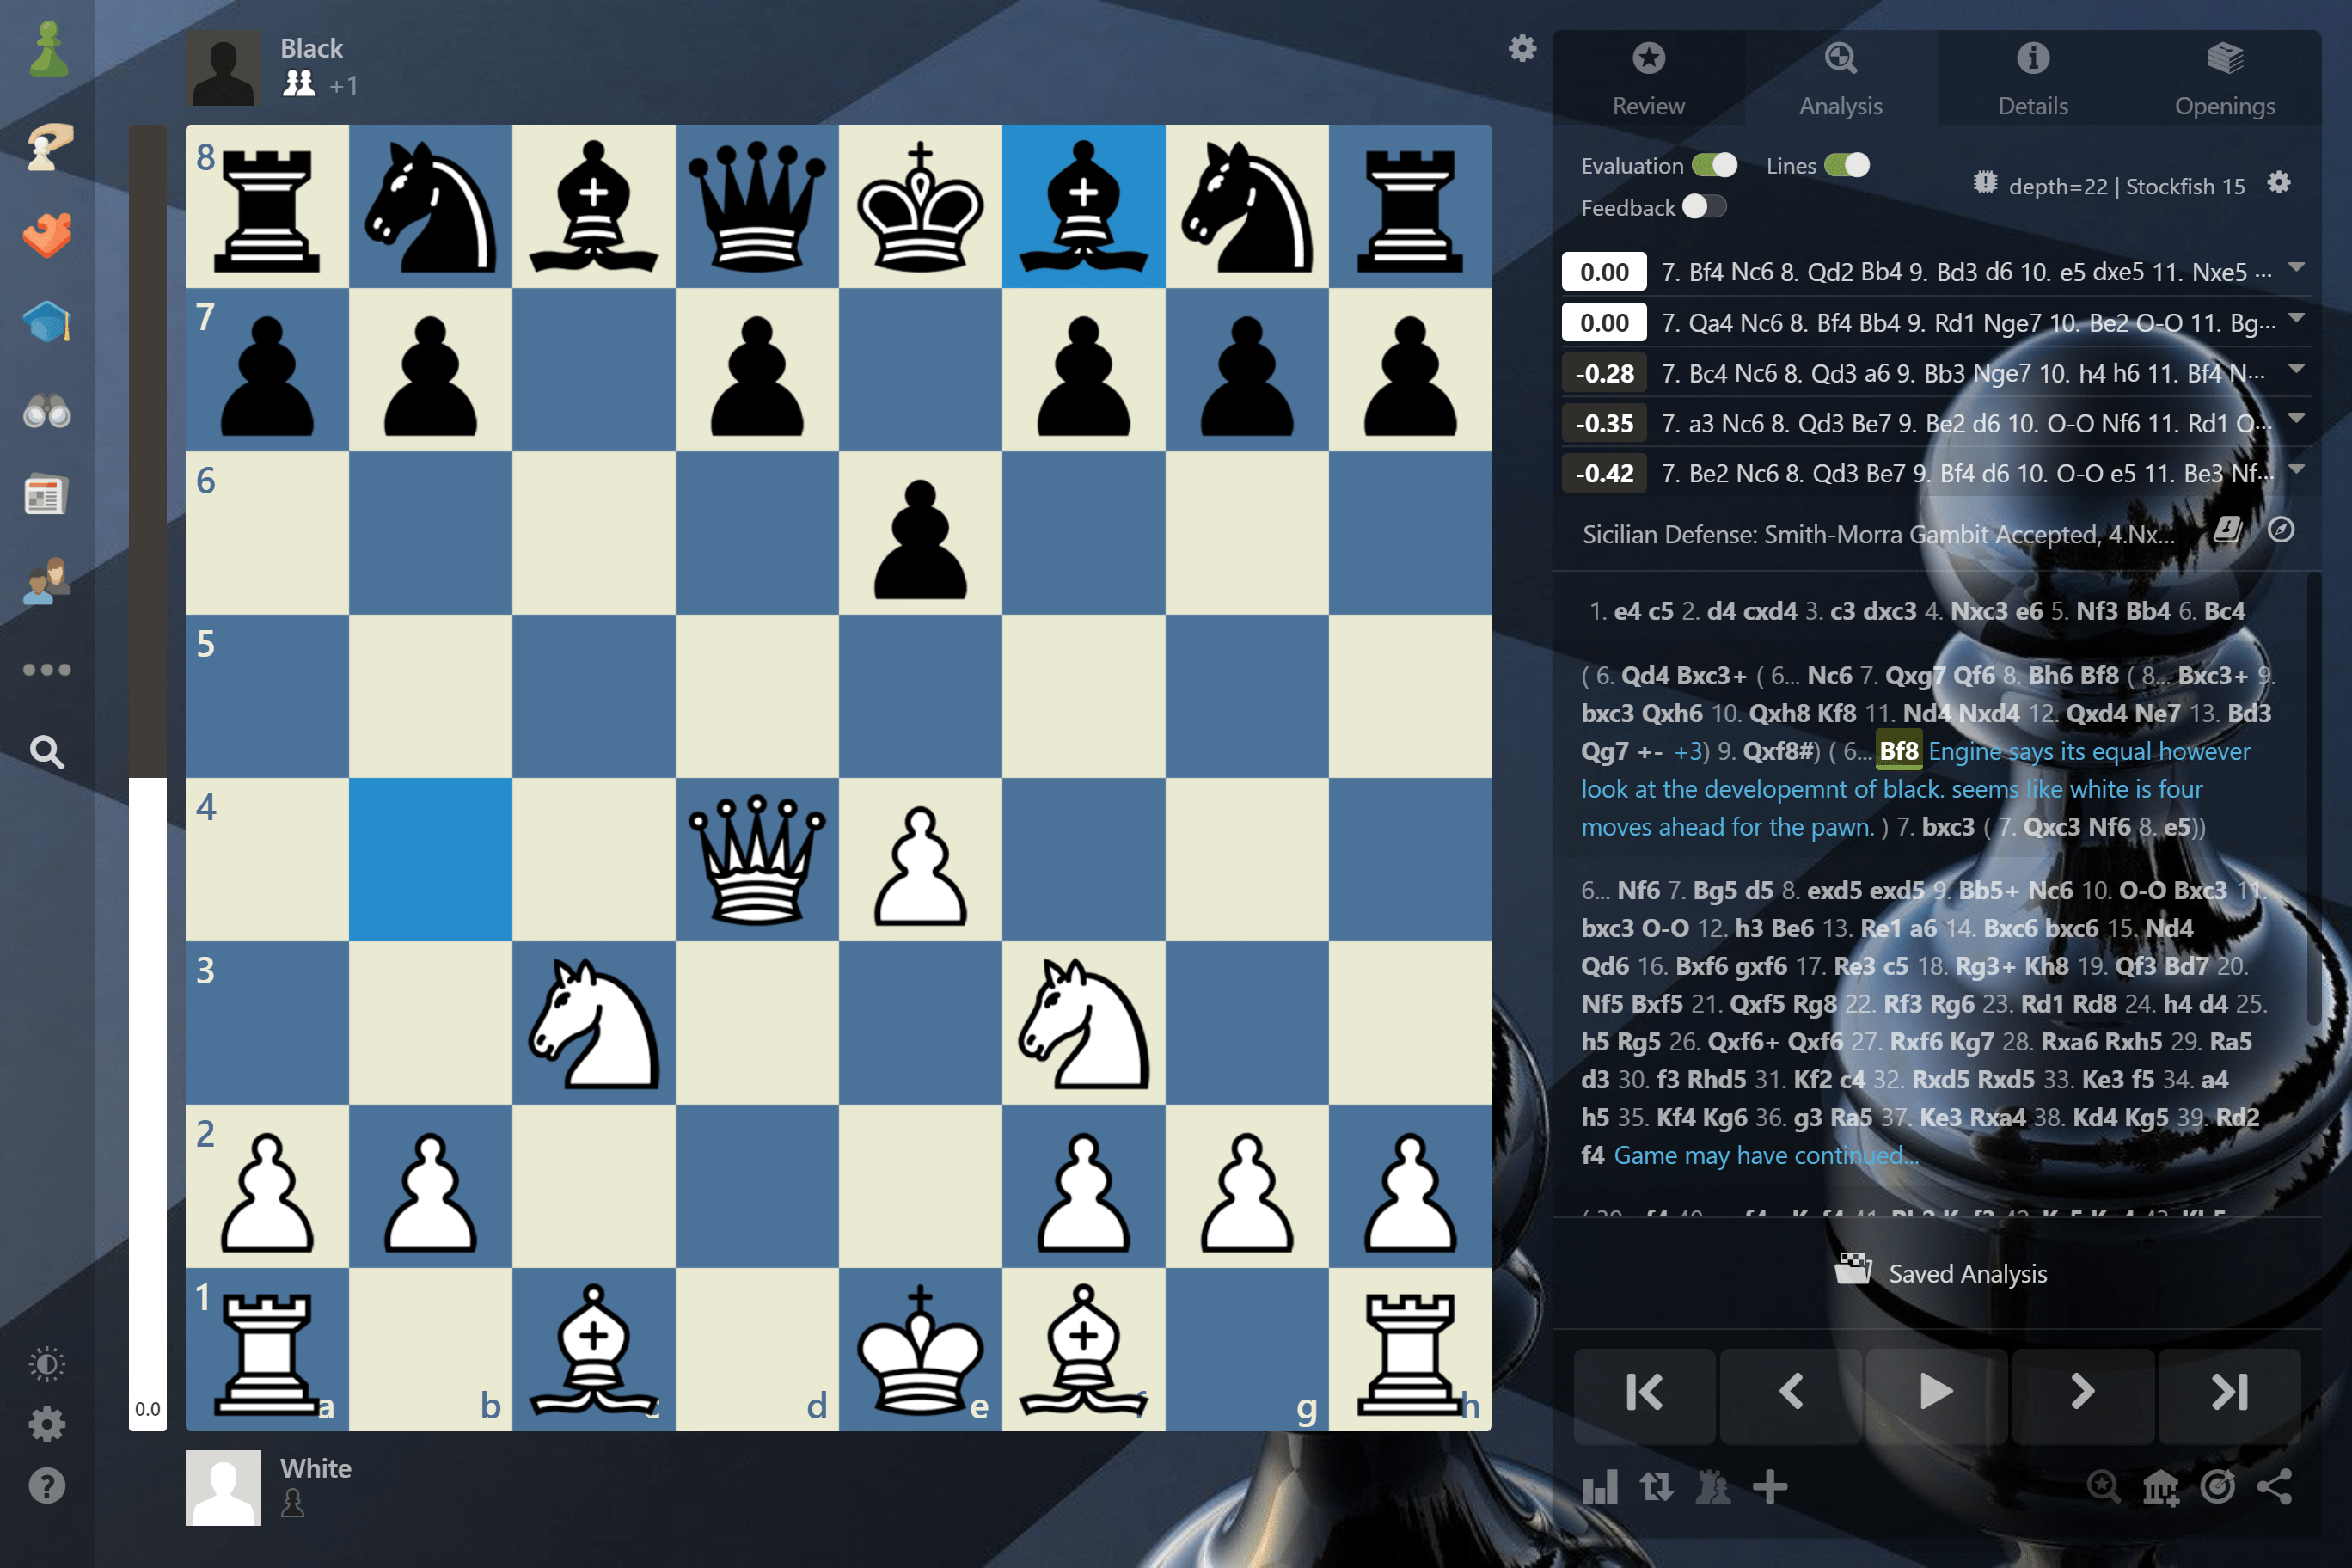 Buggy position evaluation in game review on the app. - Chess Forums 